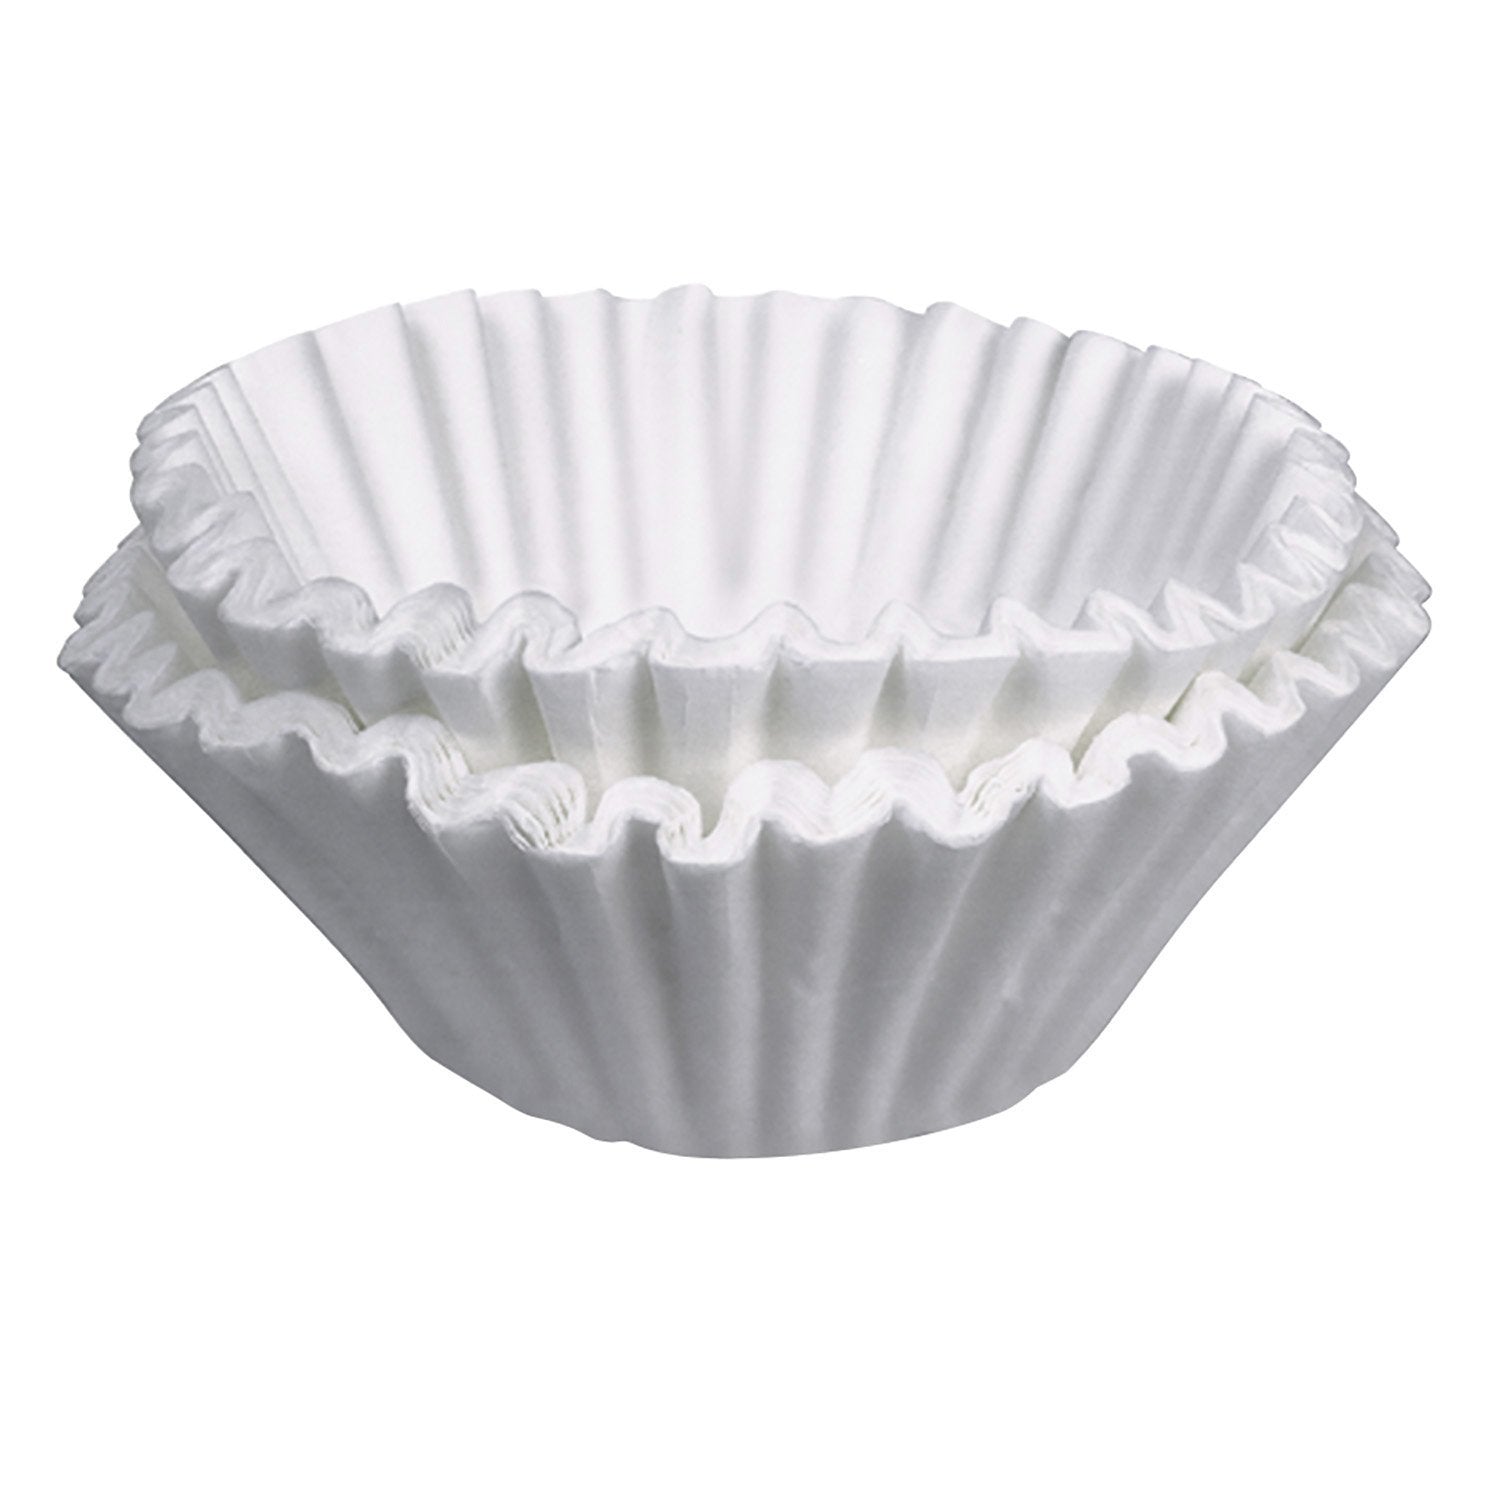 12 Cup Coffee Filters Commercial Restaurant Grade - 1,000 Count Selection of coffee filters is a vital step in brewing perfect coffee